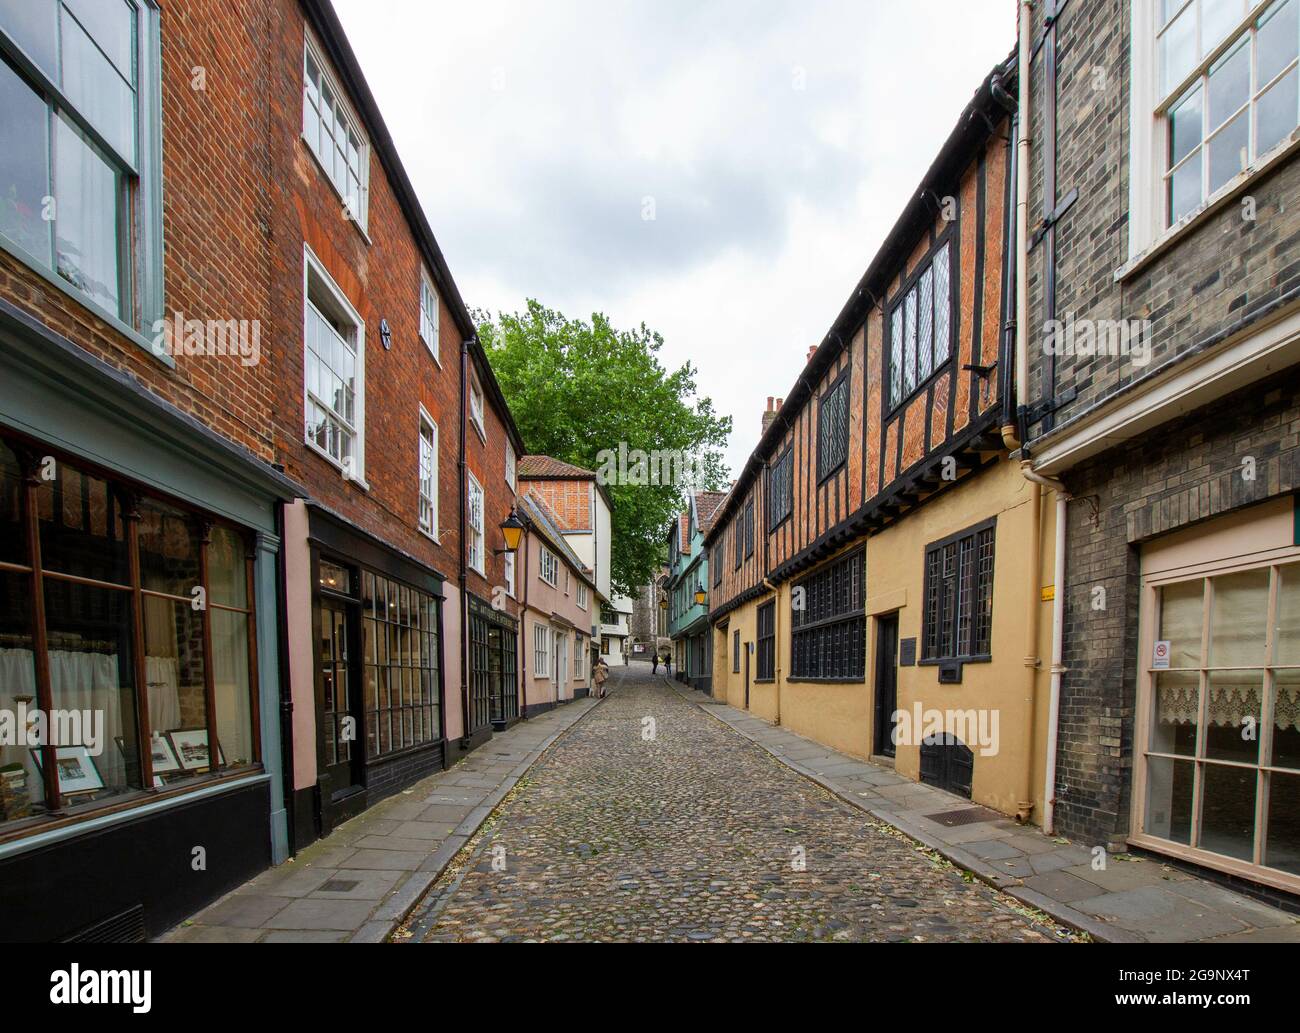 NORWICH, UNITED KINGDOM - Aug 08, 2016: A scenic view of the Elm Hill cobbled lane with buildings in Norwich, Norfolk Stock Photo